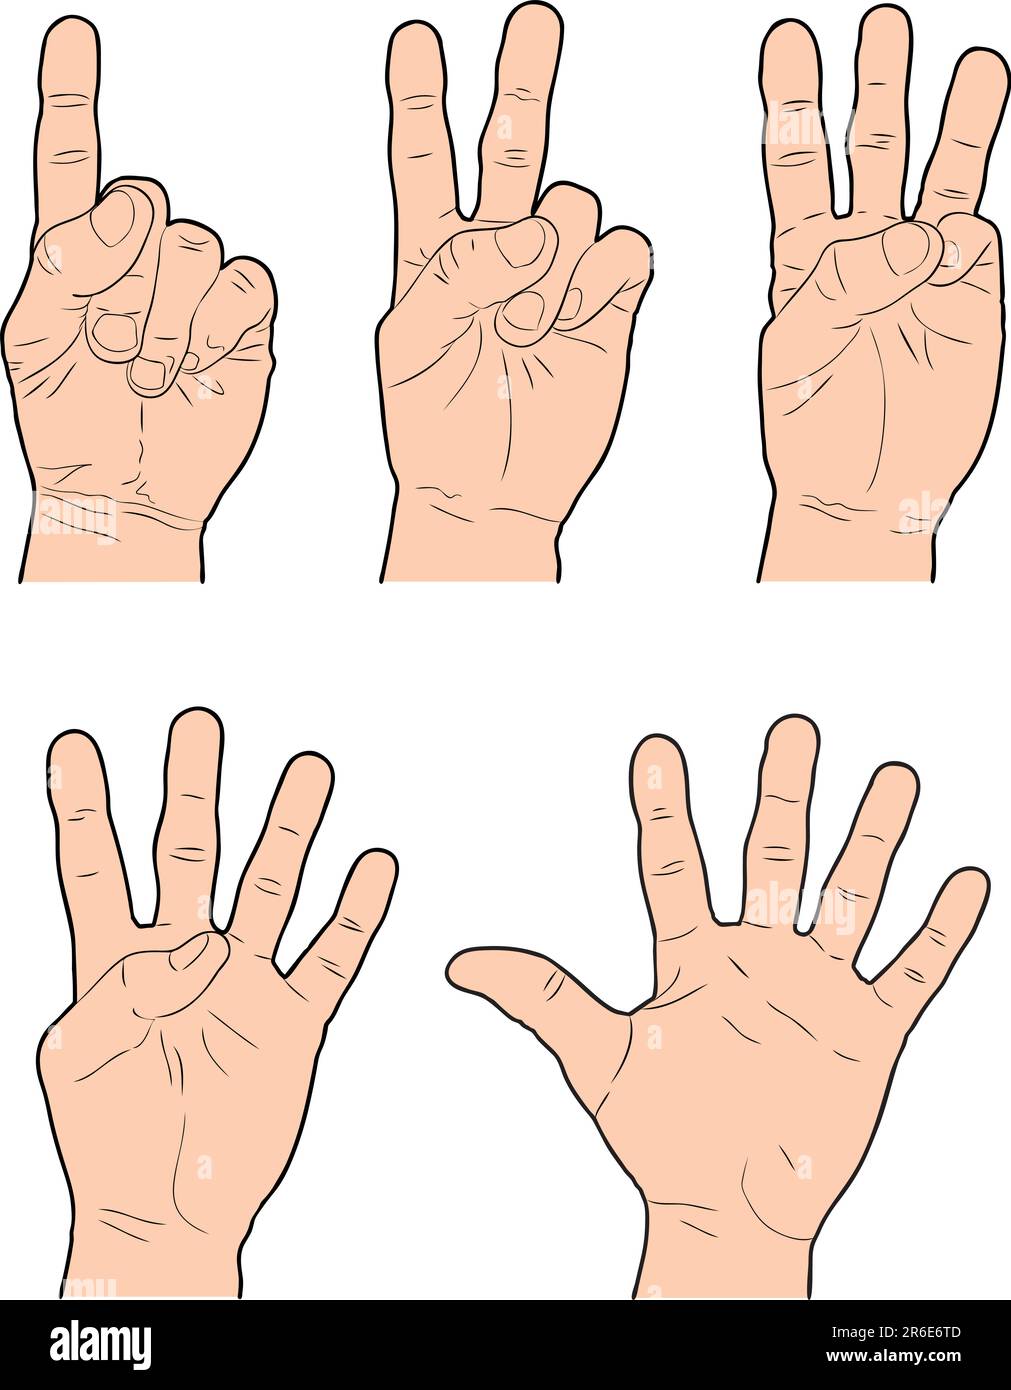 Hands representing the numbers 1 through 5 using fingers. Stock Vector